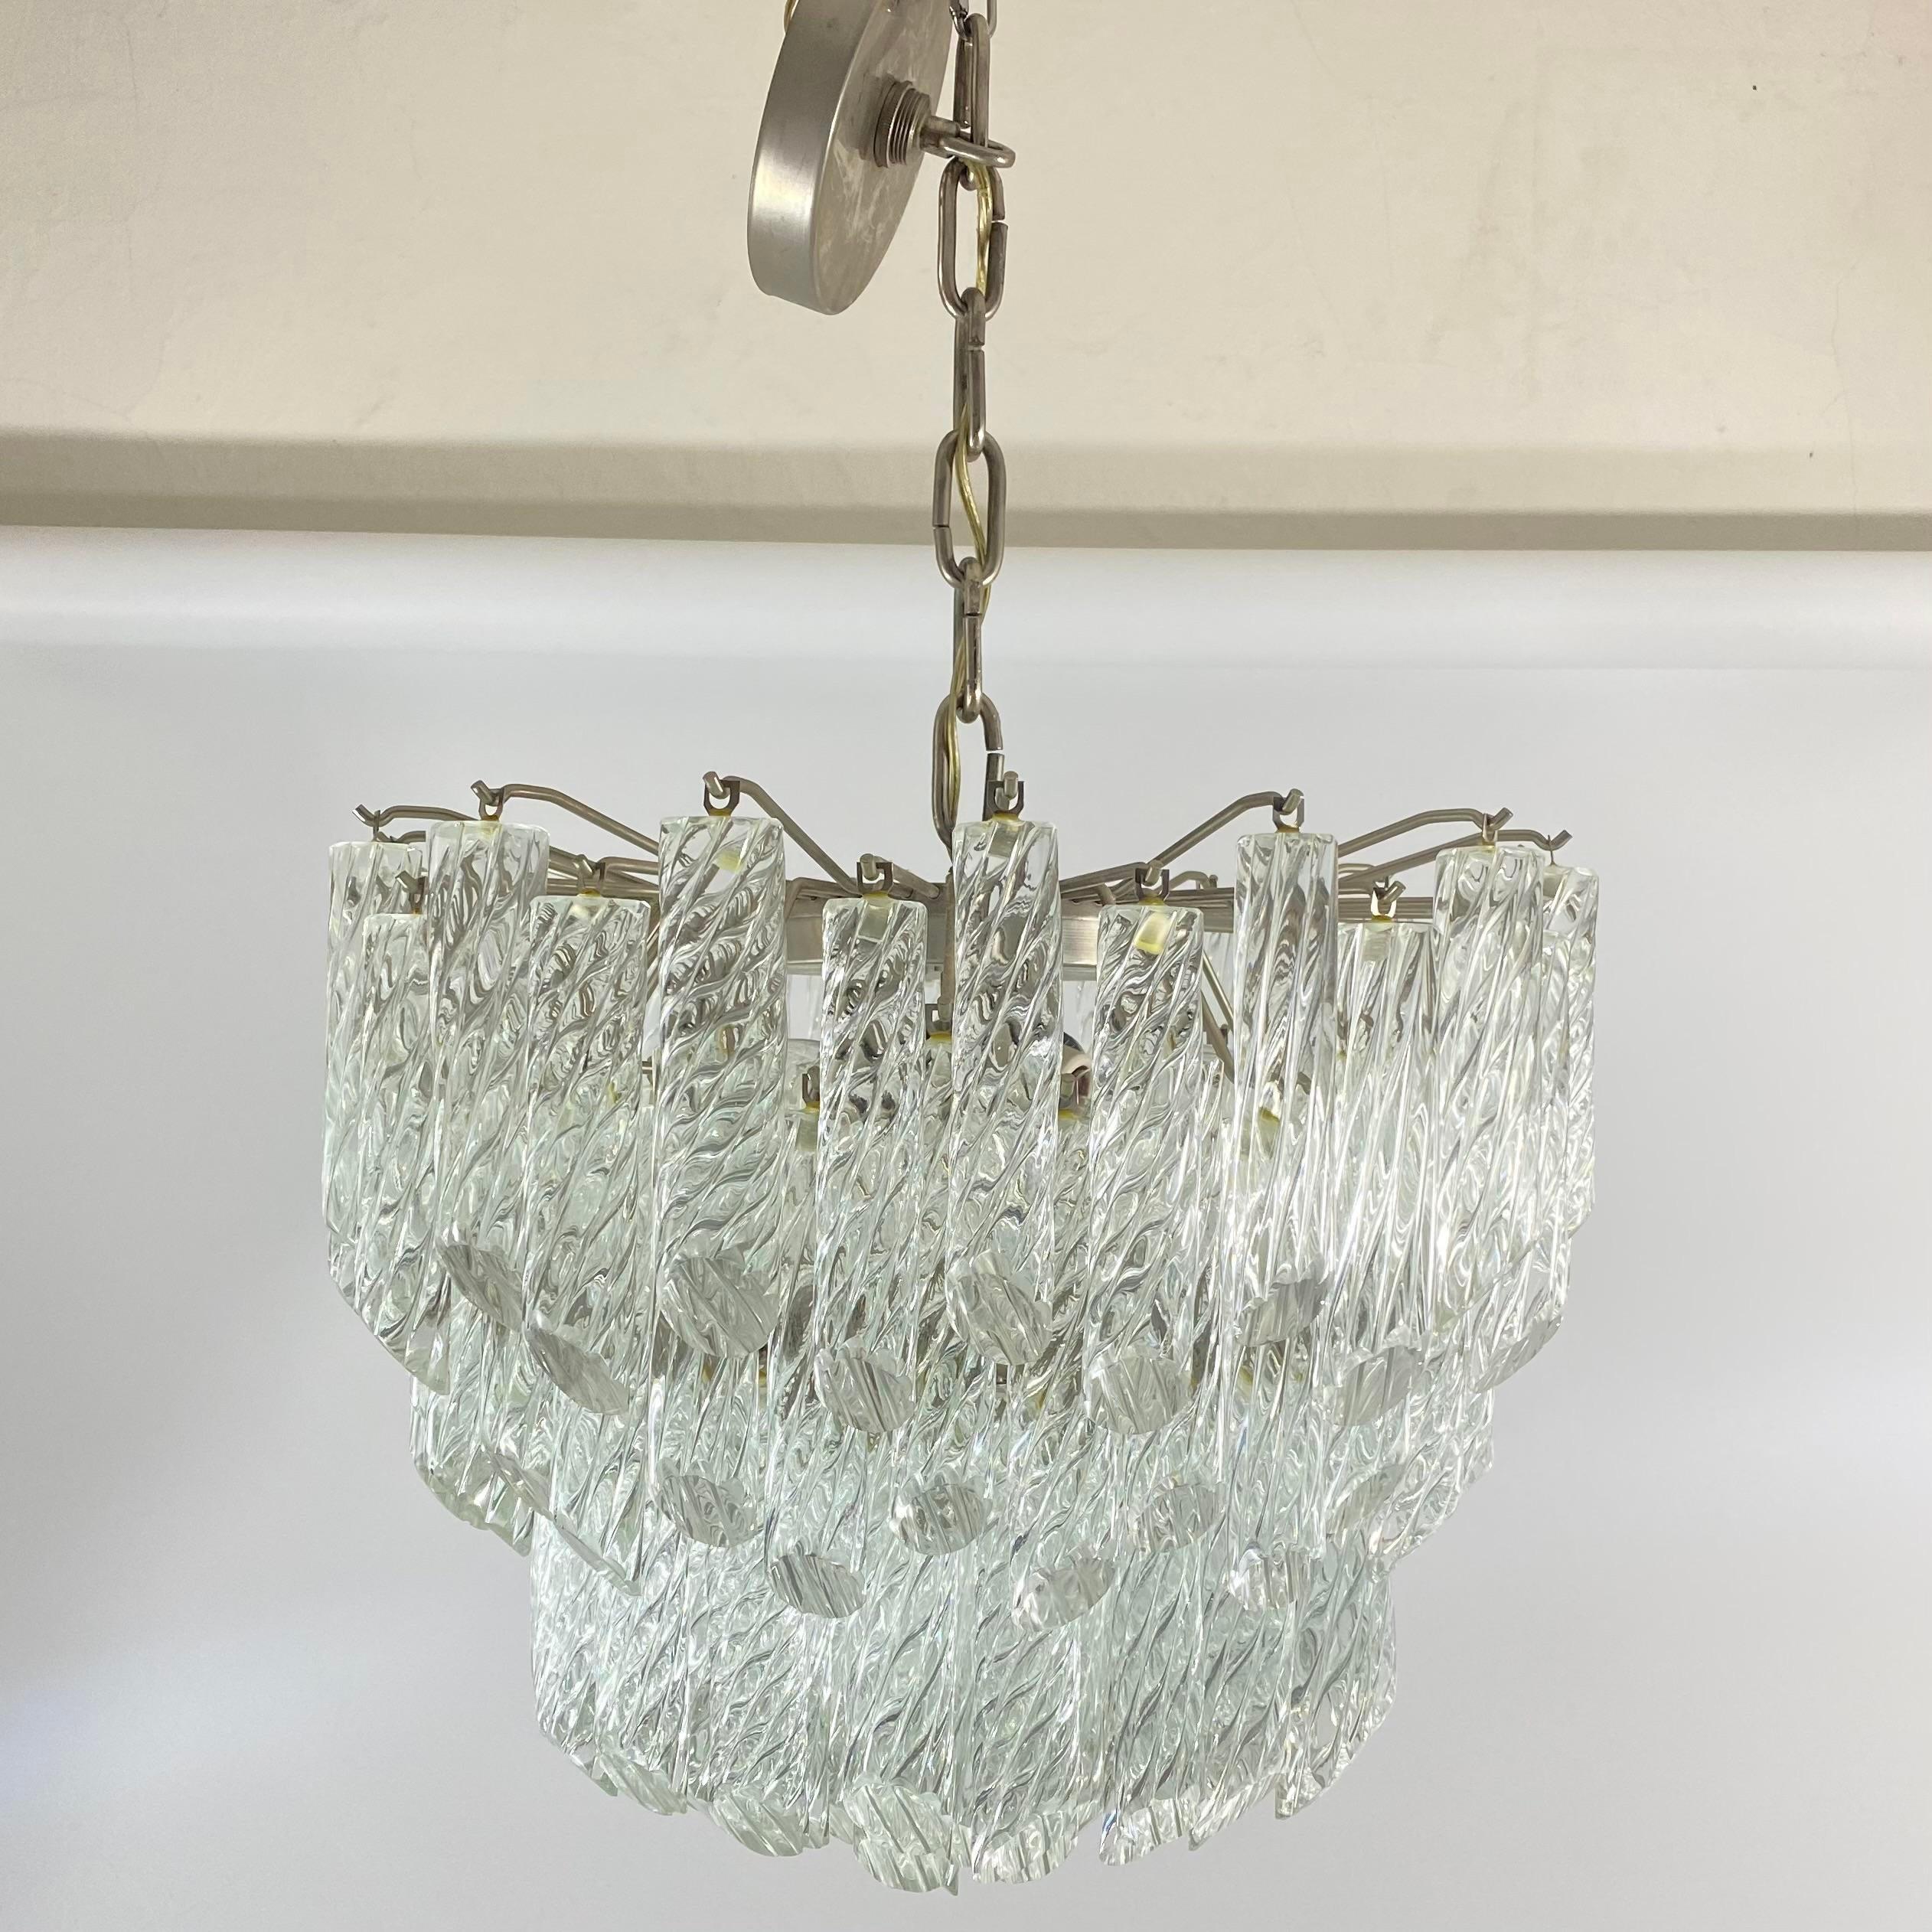 1960s Camer Spiral Murano Glass Chandelier In Excellent Condition For Sale In Westfield, NJ